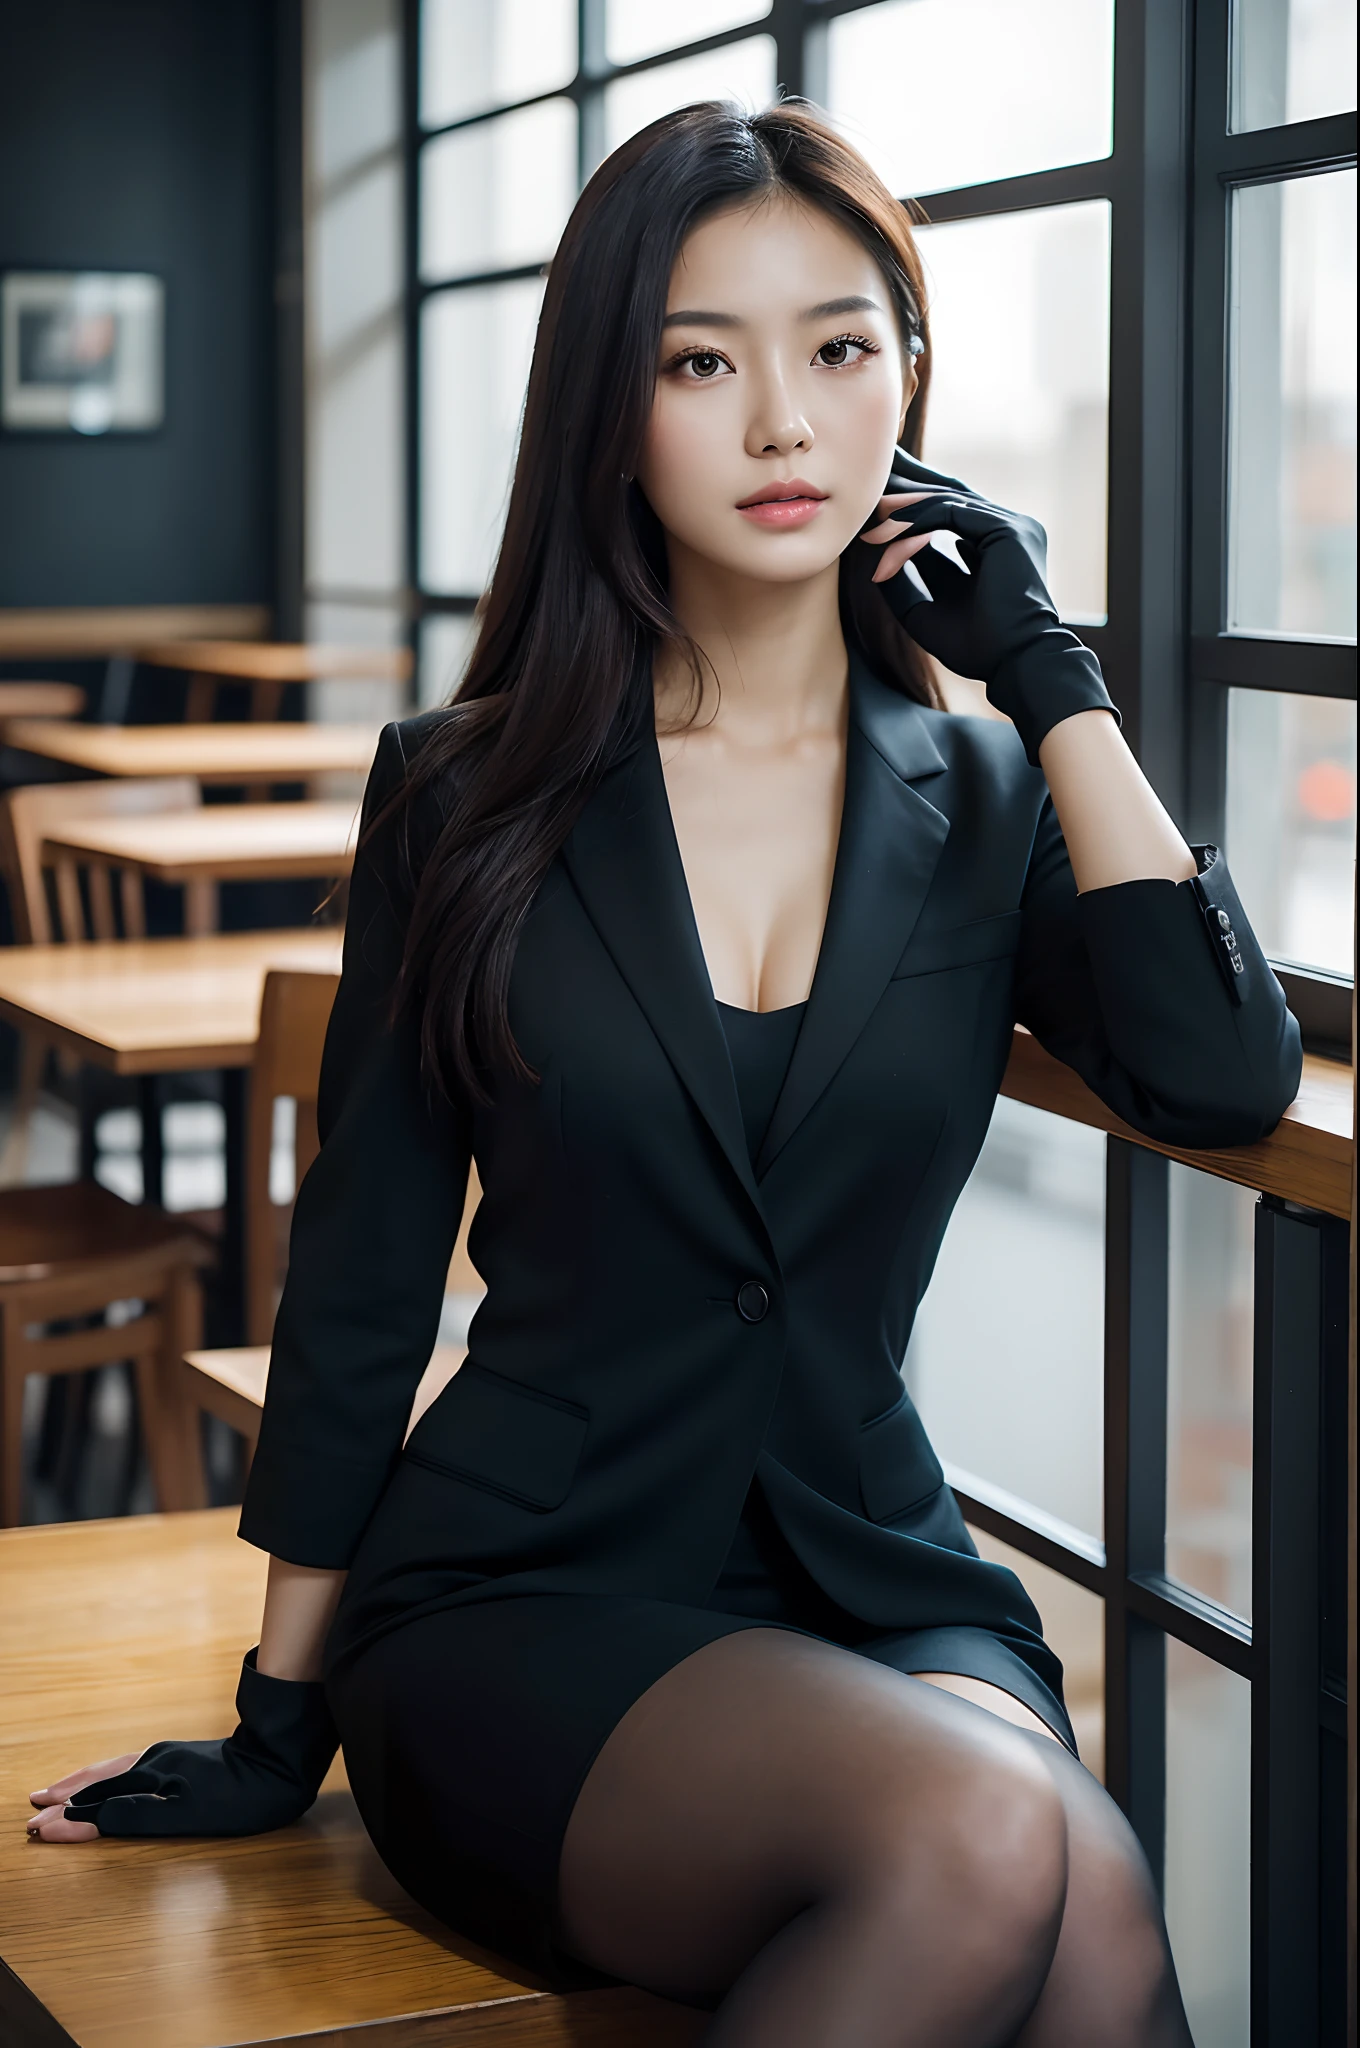 (masterpiece), (best quality), 8k resolution, 1girl, Asian girl, stunning beauty, perfect face, mature female, 20yo, sexy, sunny, sitting, autumn, indoor, in the cafe, business suit, bespoke, black gloves, cinematic, low key, old film color, film photography,